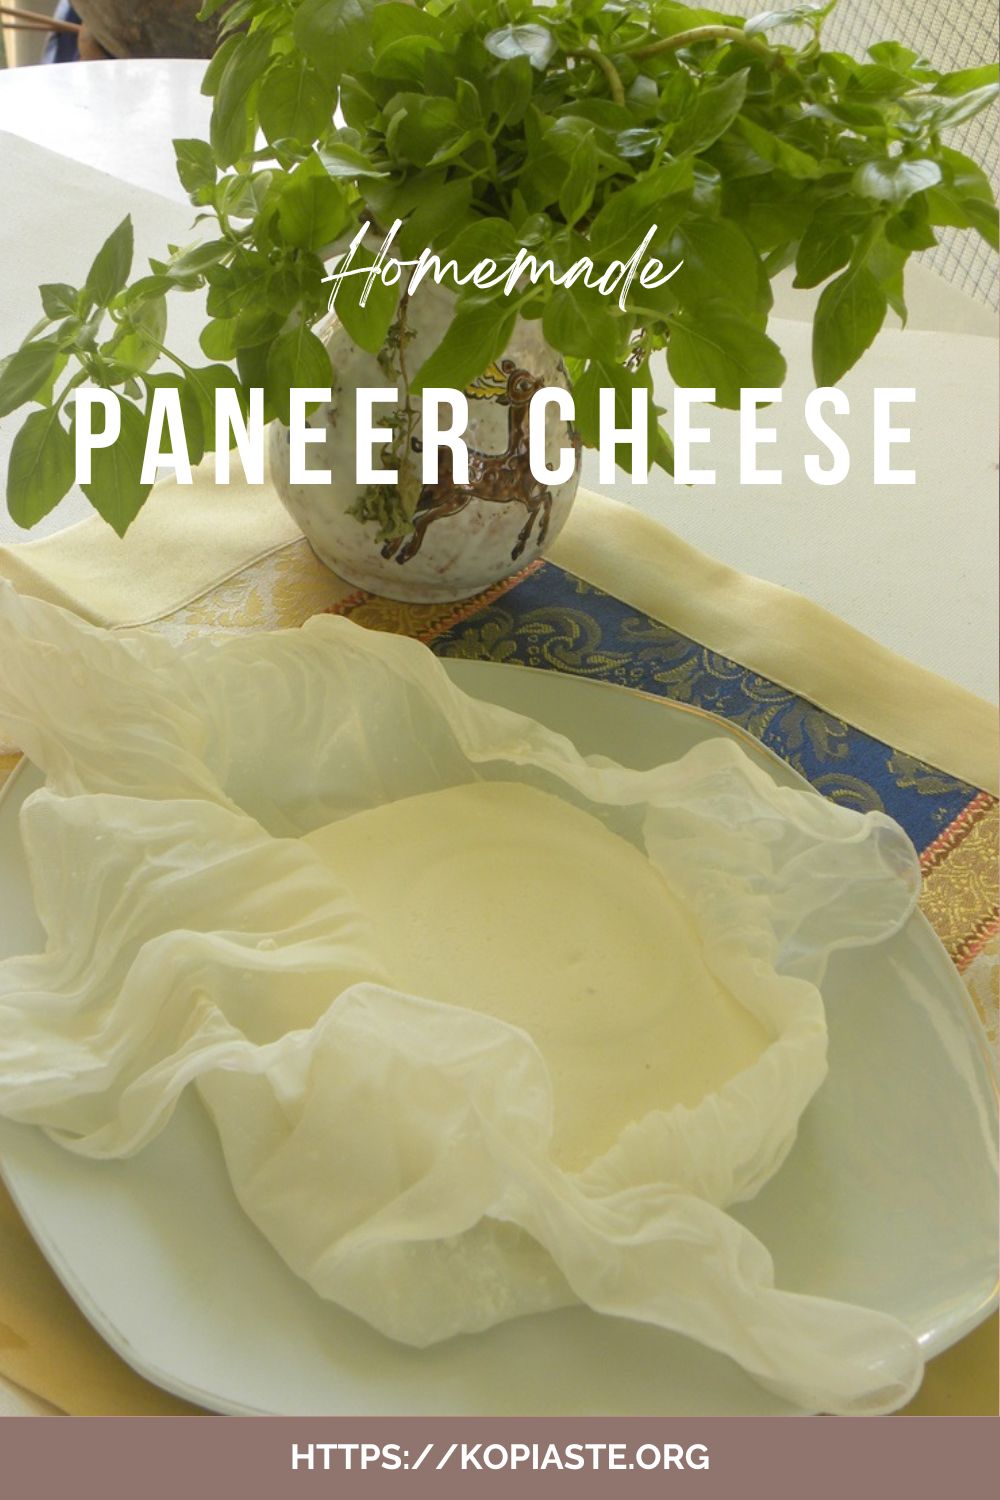 Collage Homemade paneer cheese image